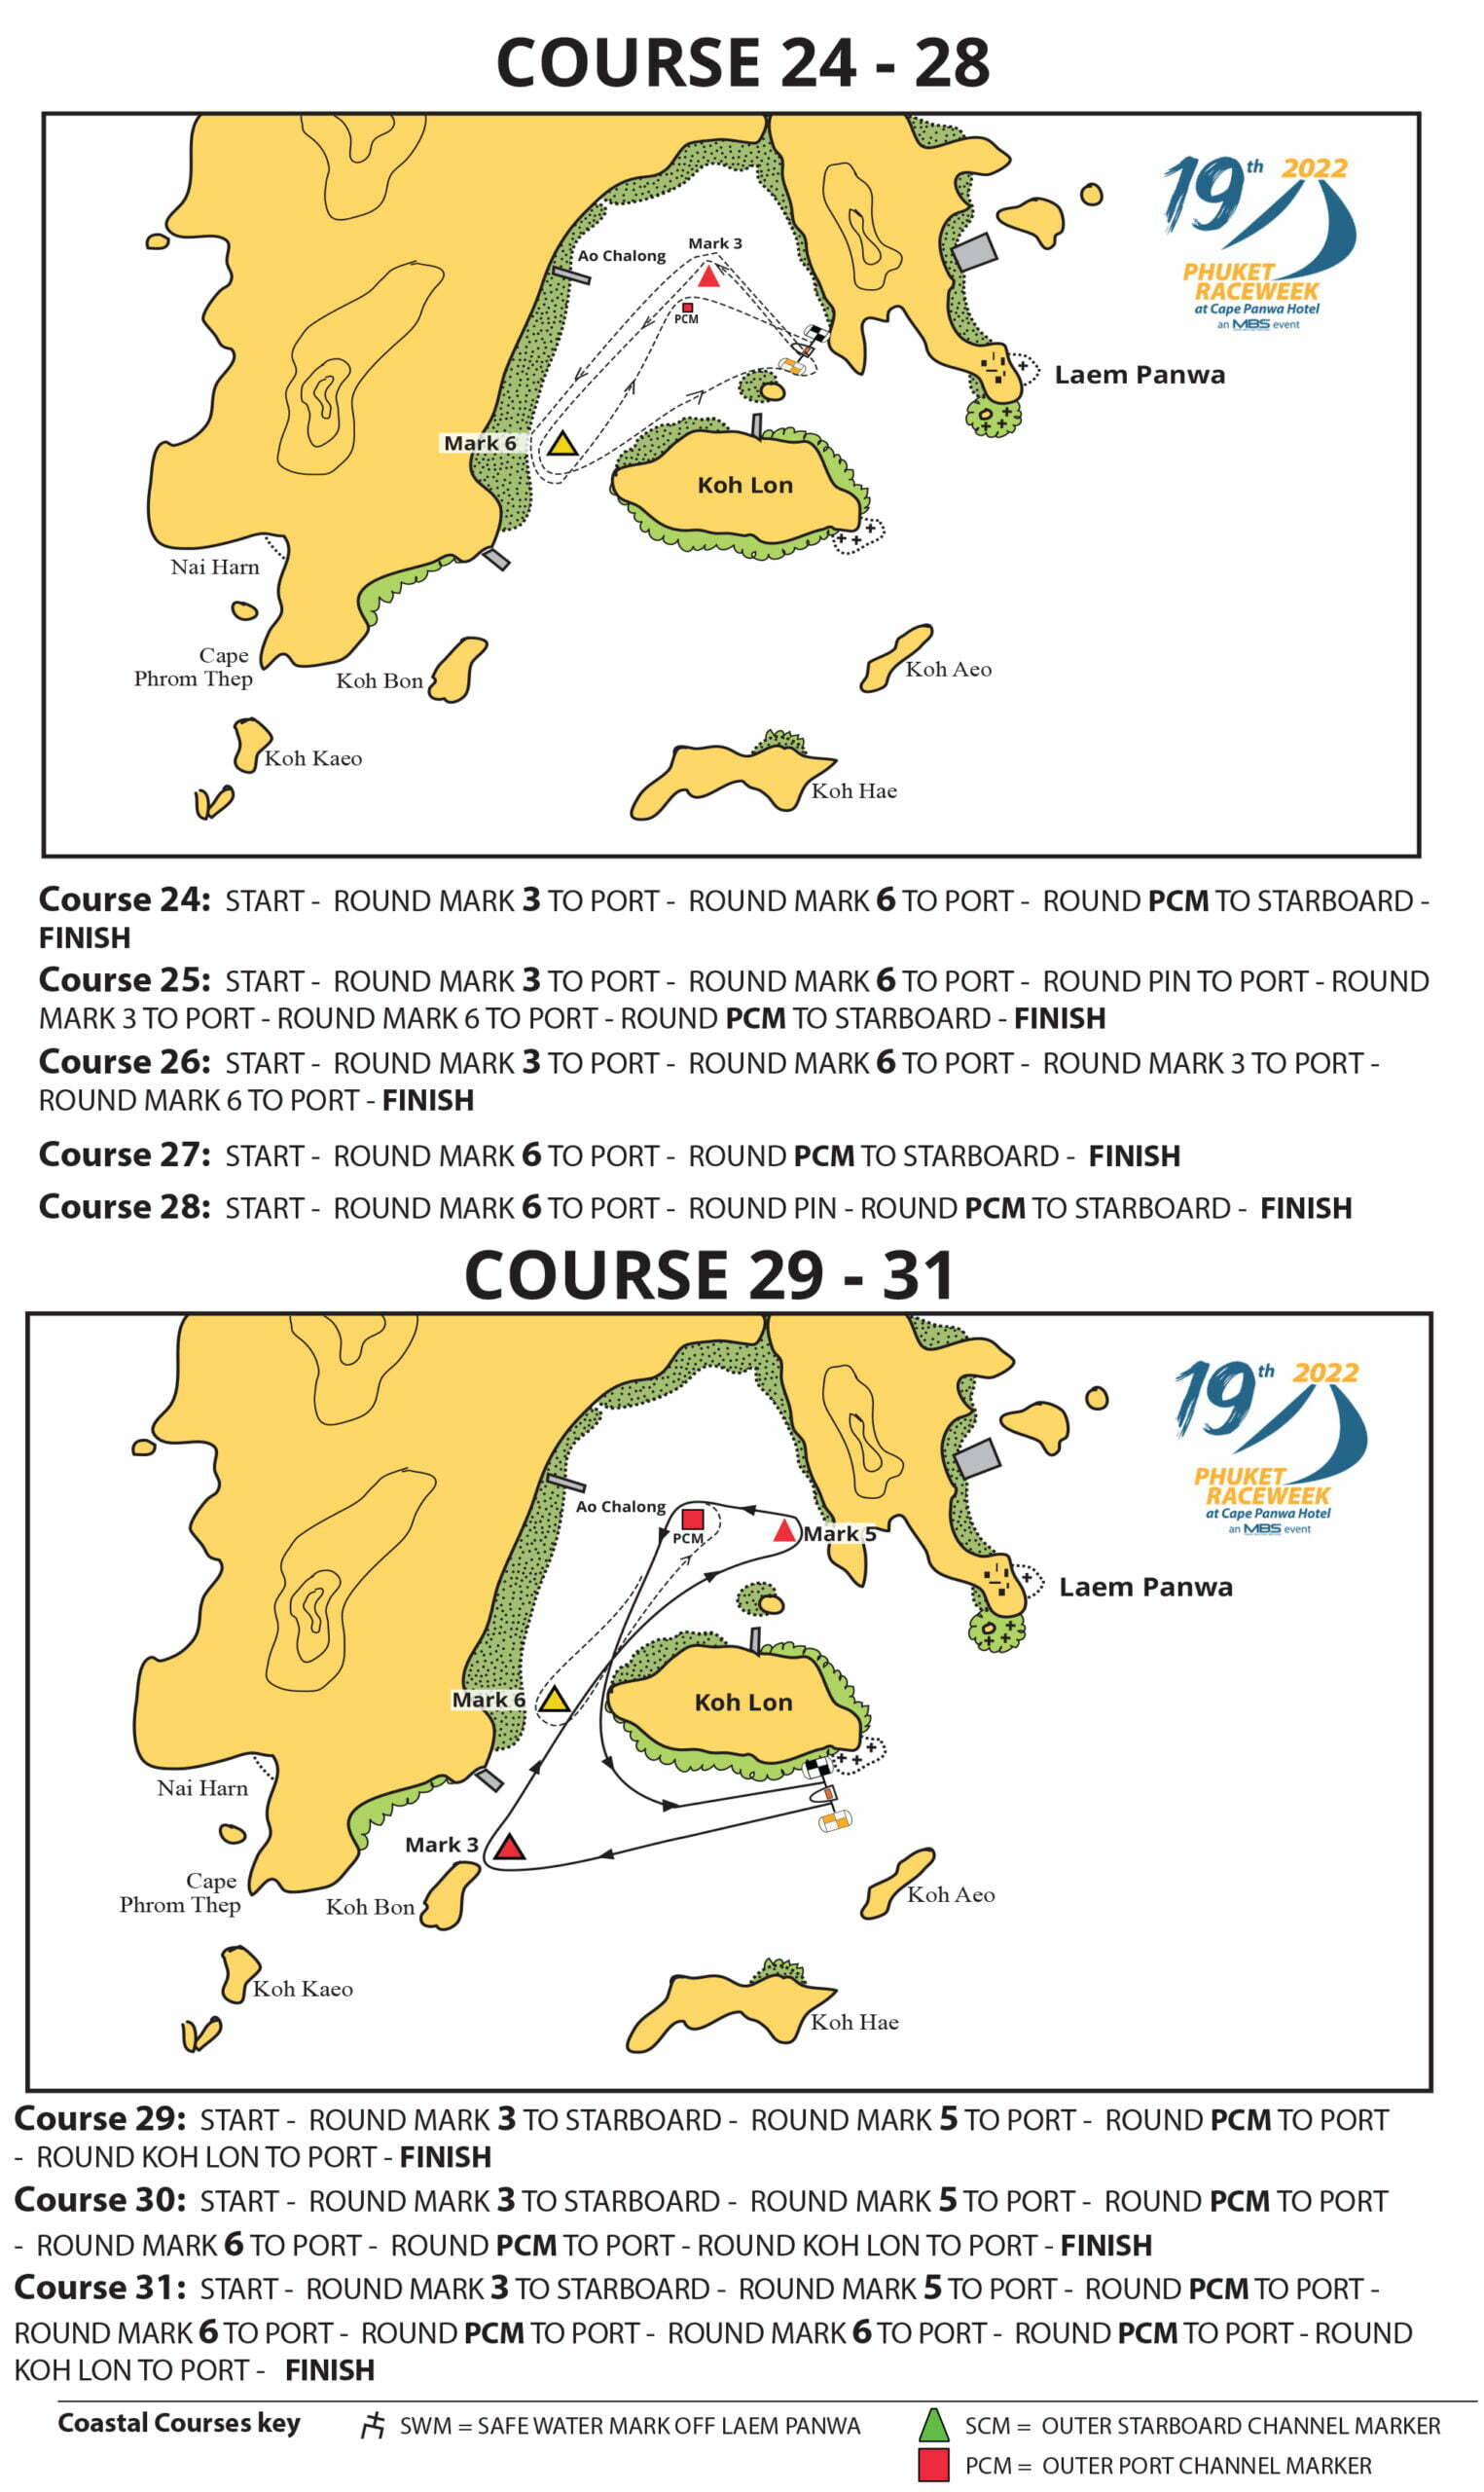 COURSE INSTRUCTIONS